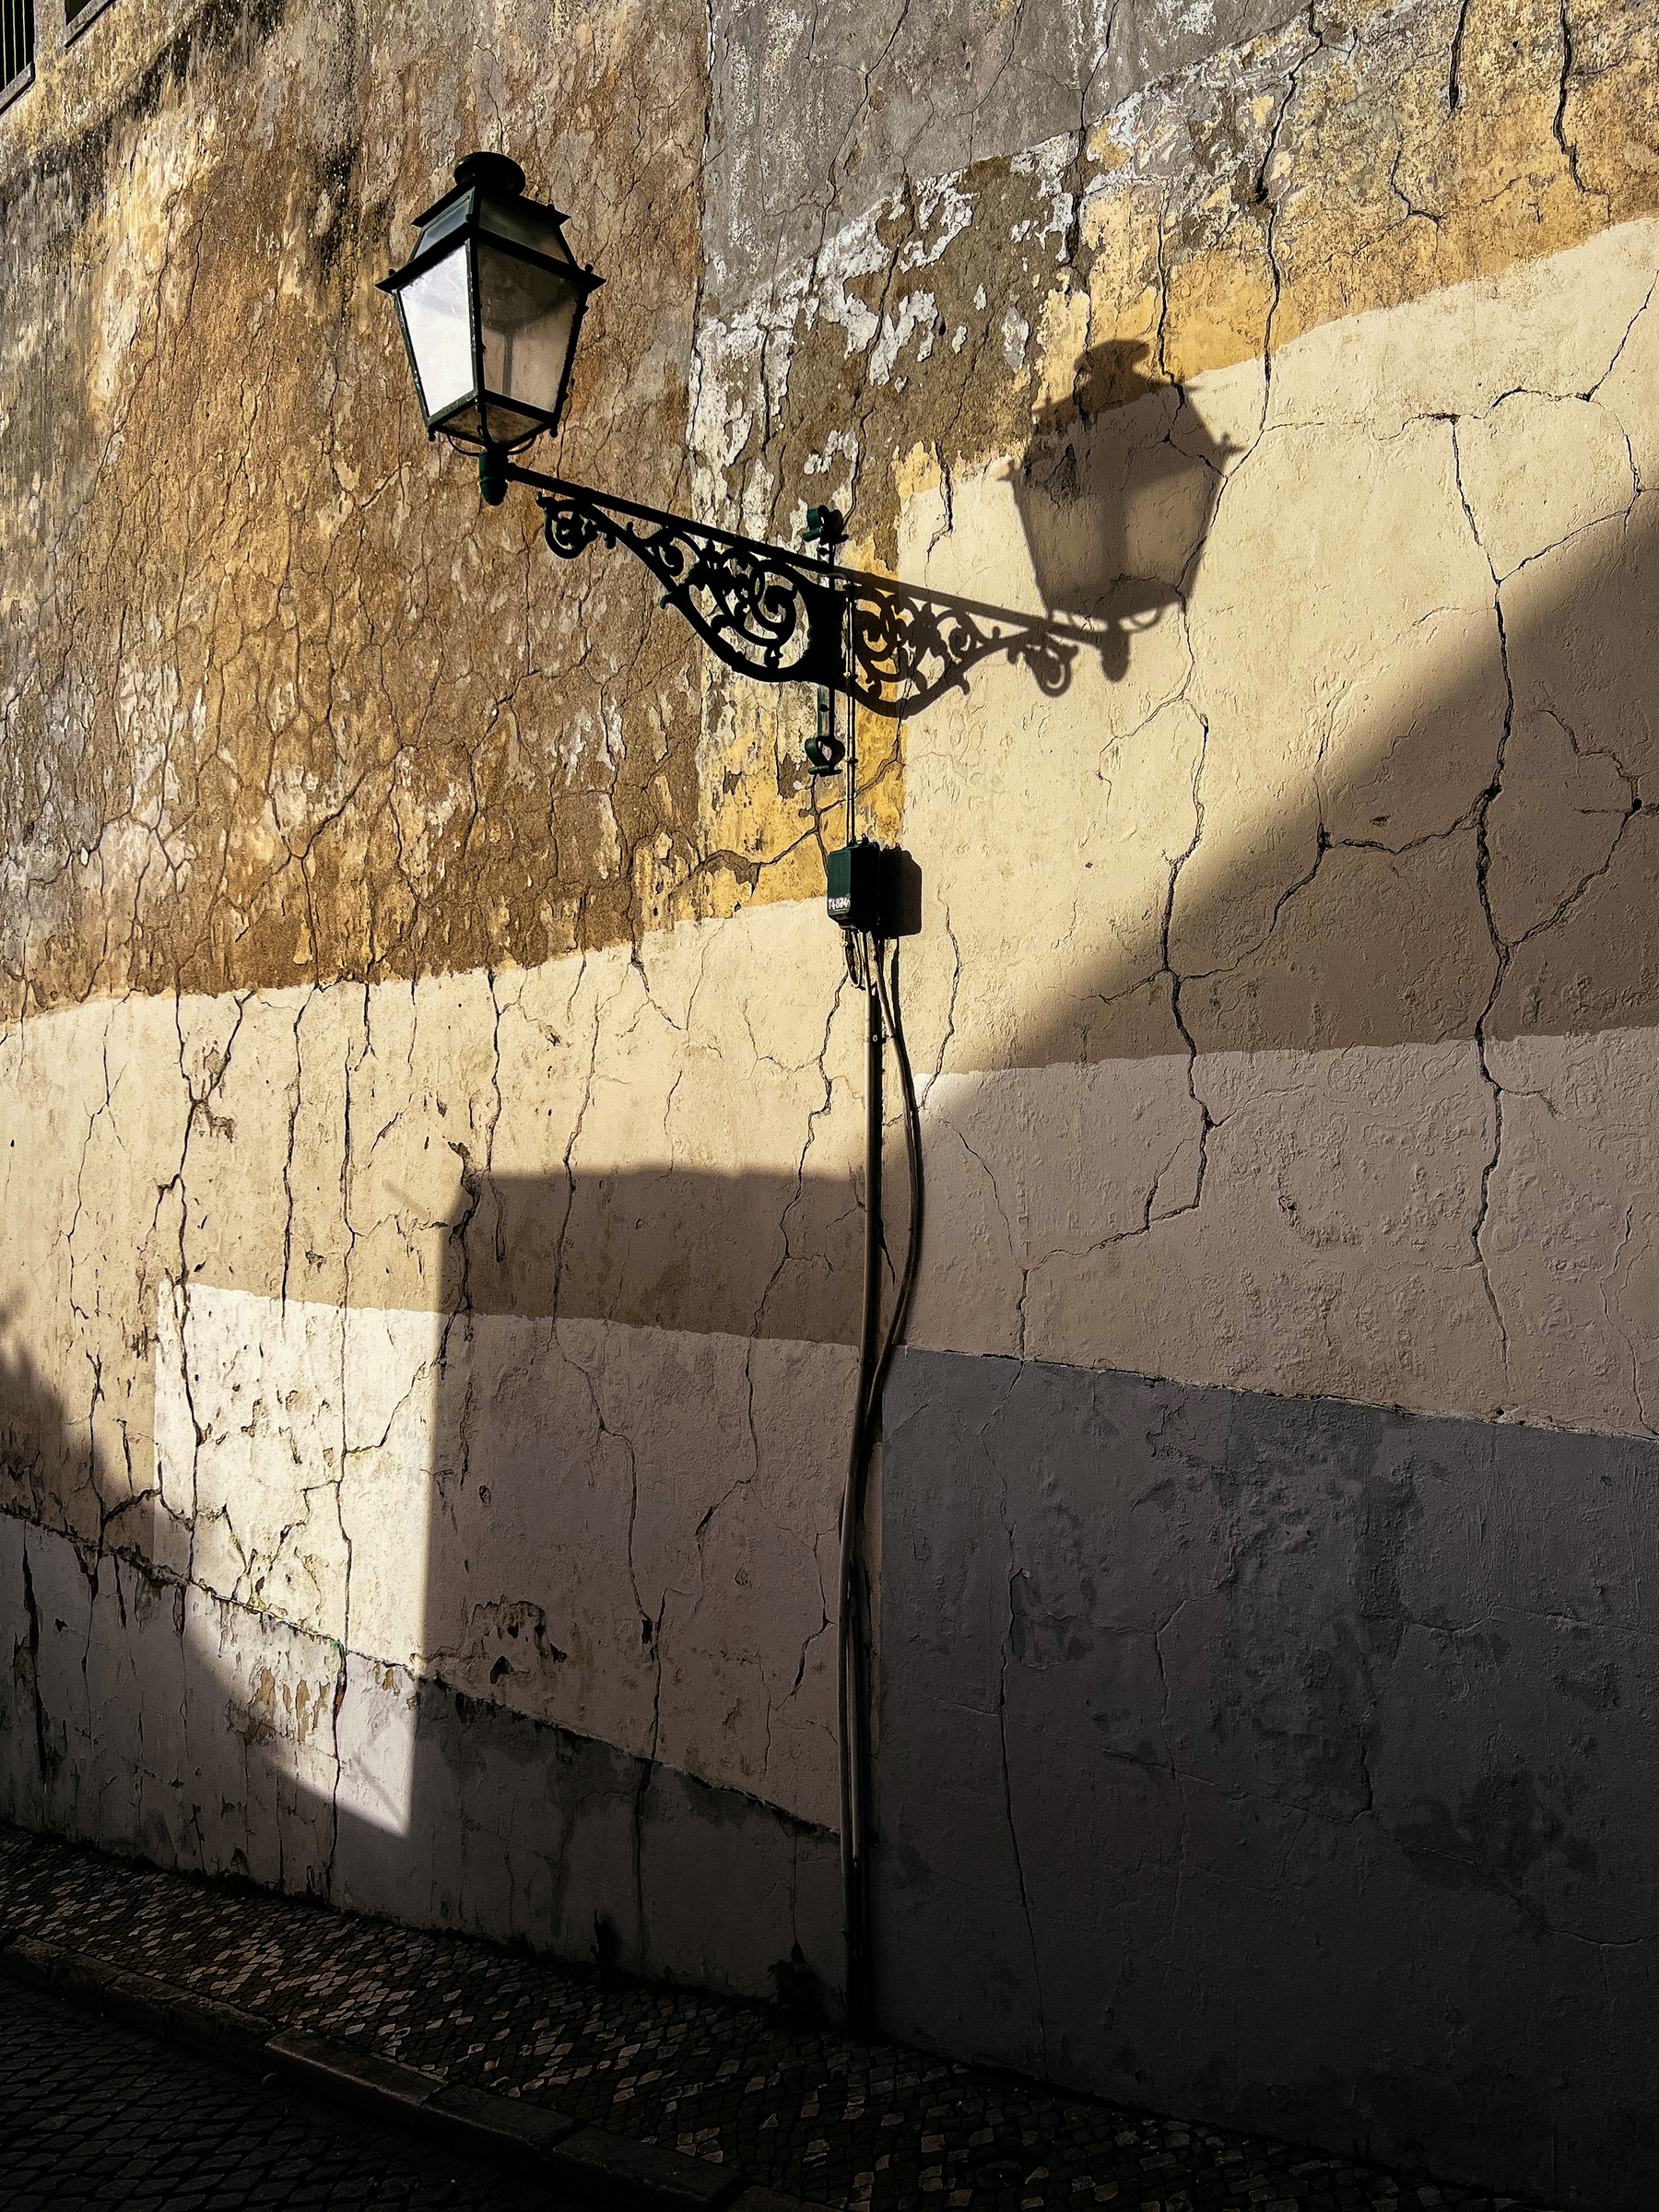 Street lamp mounted on a decorative metal bracket projecting from a weathered wall, casting a shadow, with cobbled street below.